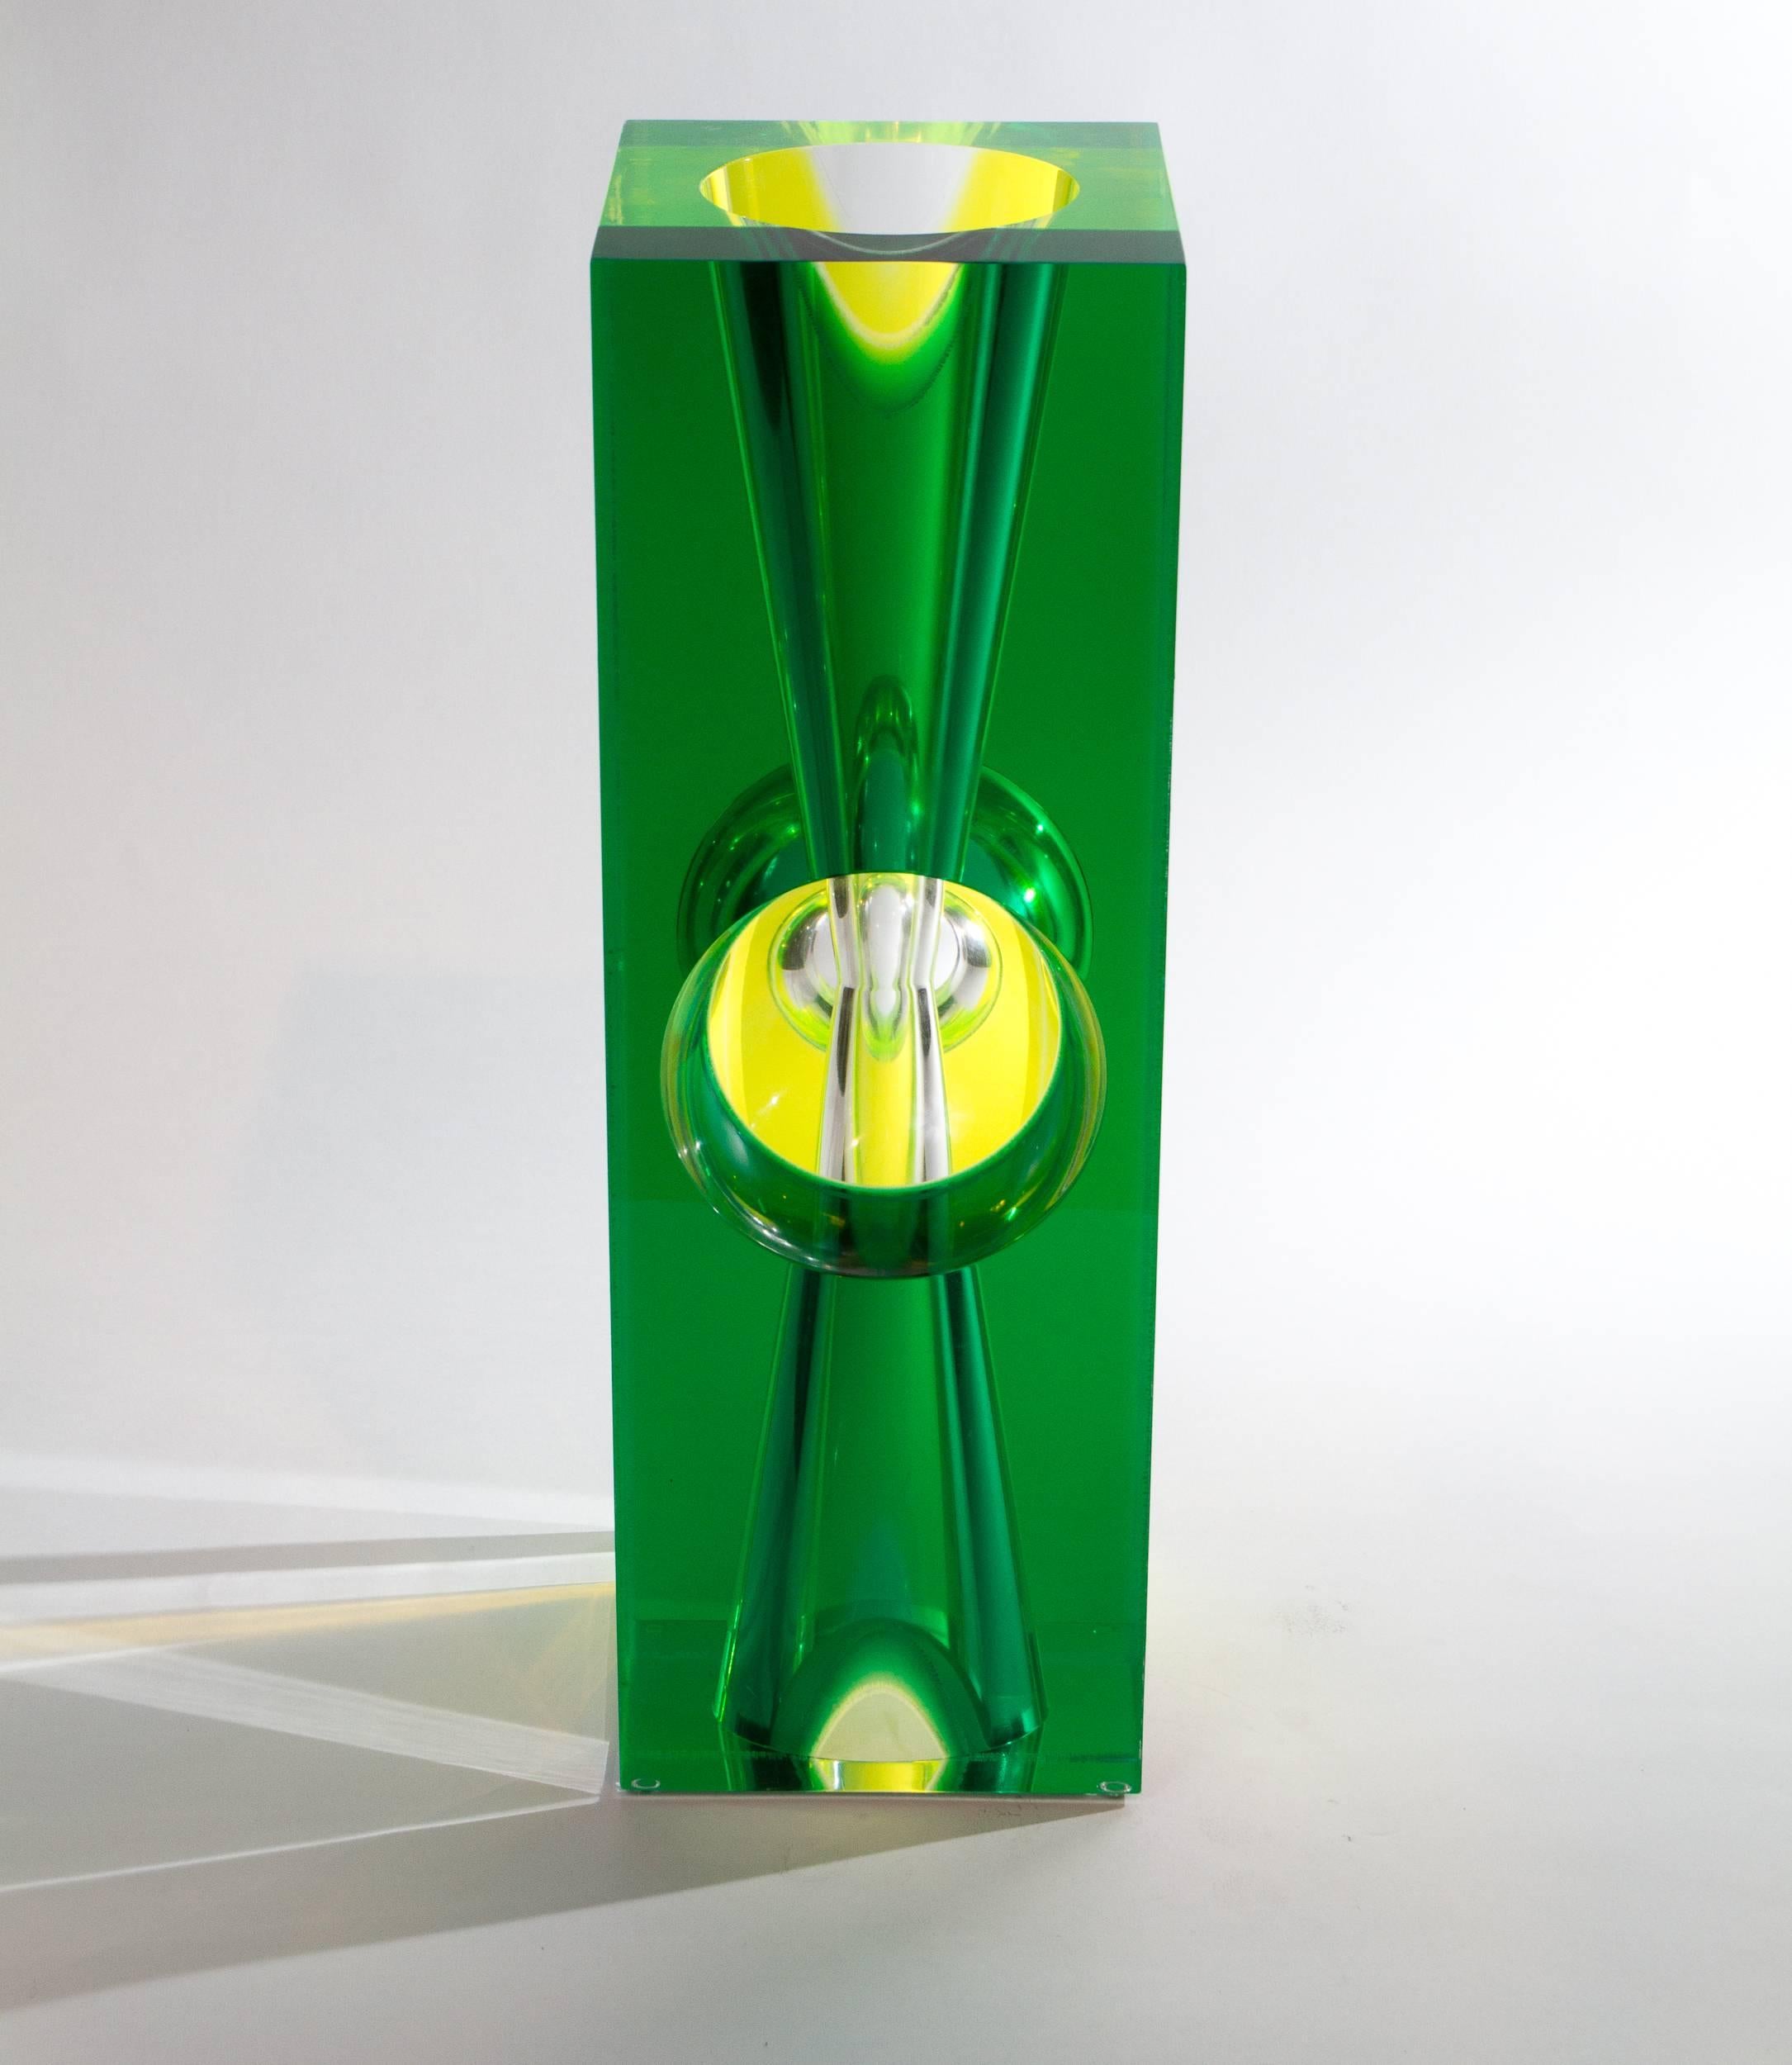 Green and yellow fluorescent hard edged Minimalist Lucite sculpture by Roz Stroll. Signed 